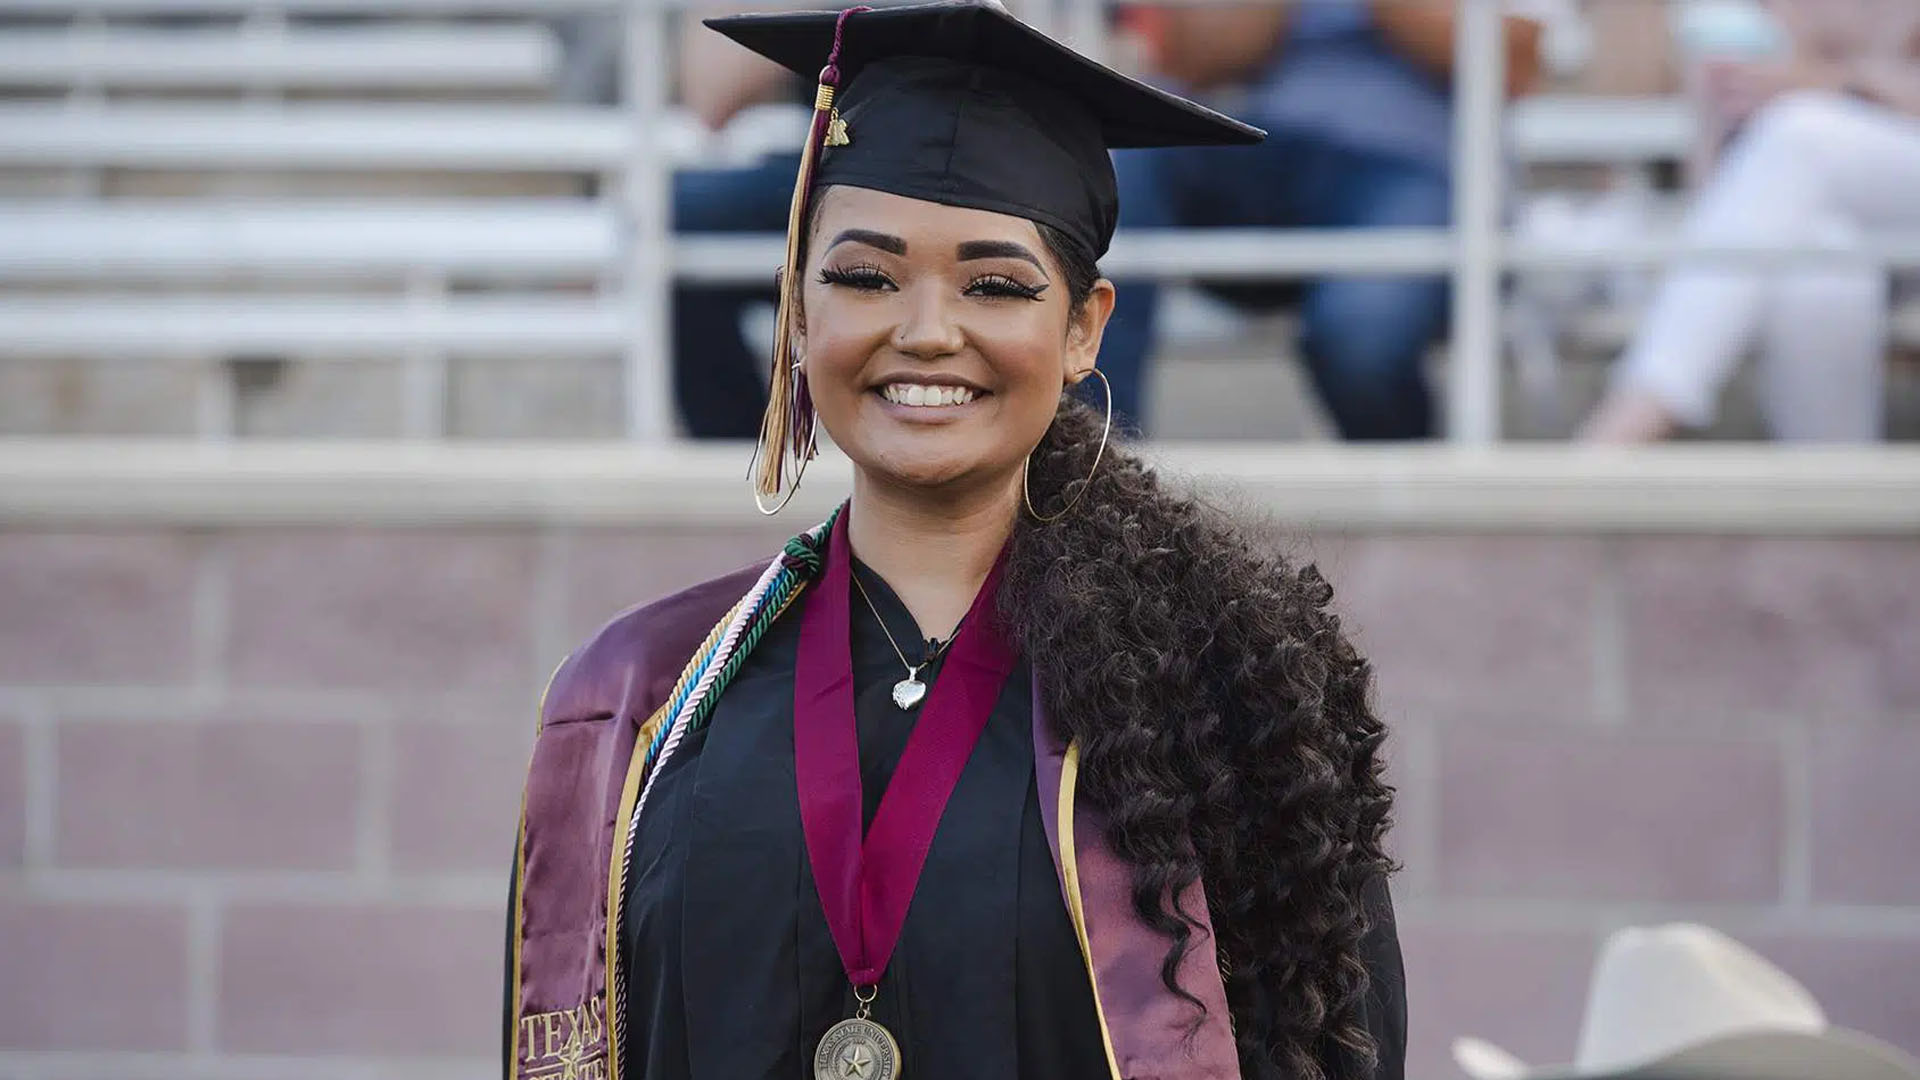 woman smiling while wearing graduation cap and gown